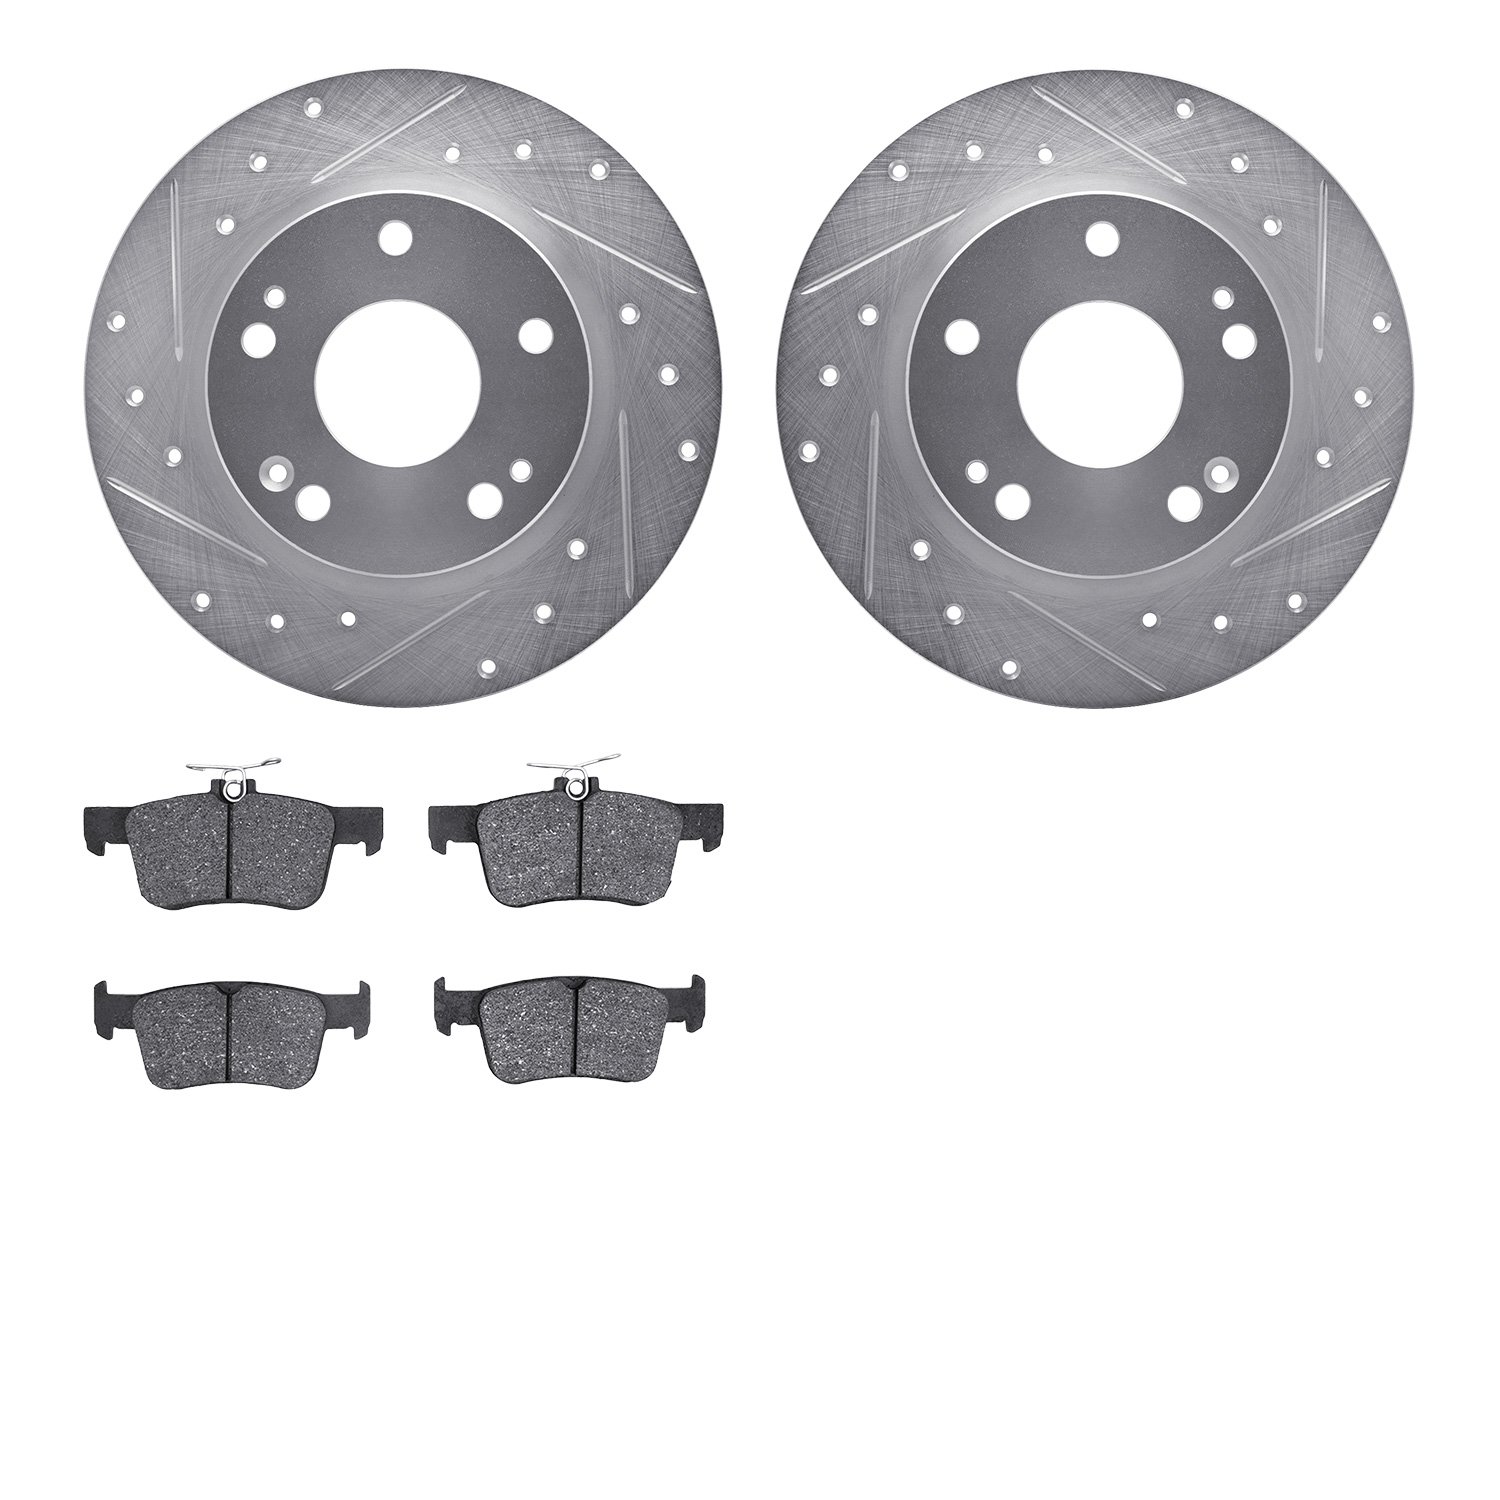 7502-59089 Drilled/Slotted Brake Rotors w/5000 Advanced Brake Pads Kit [Silver], Fits Select Acura/Honda, Position: Rear